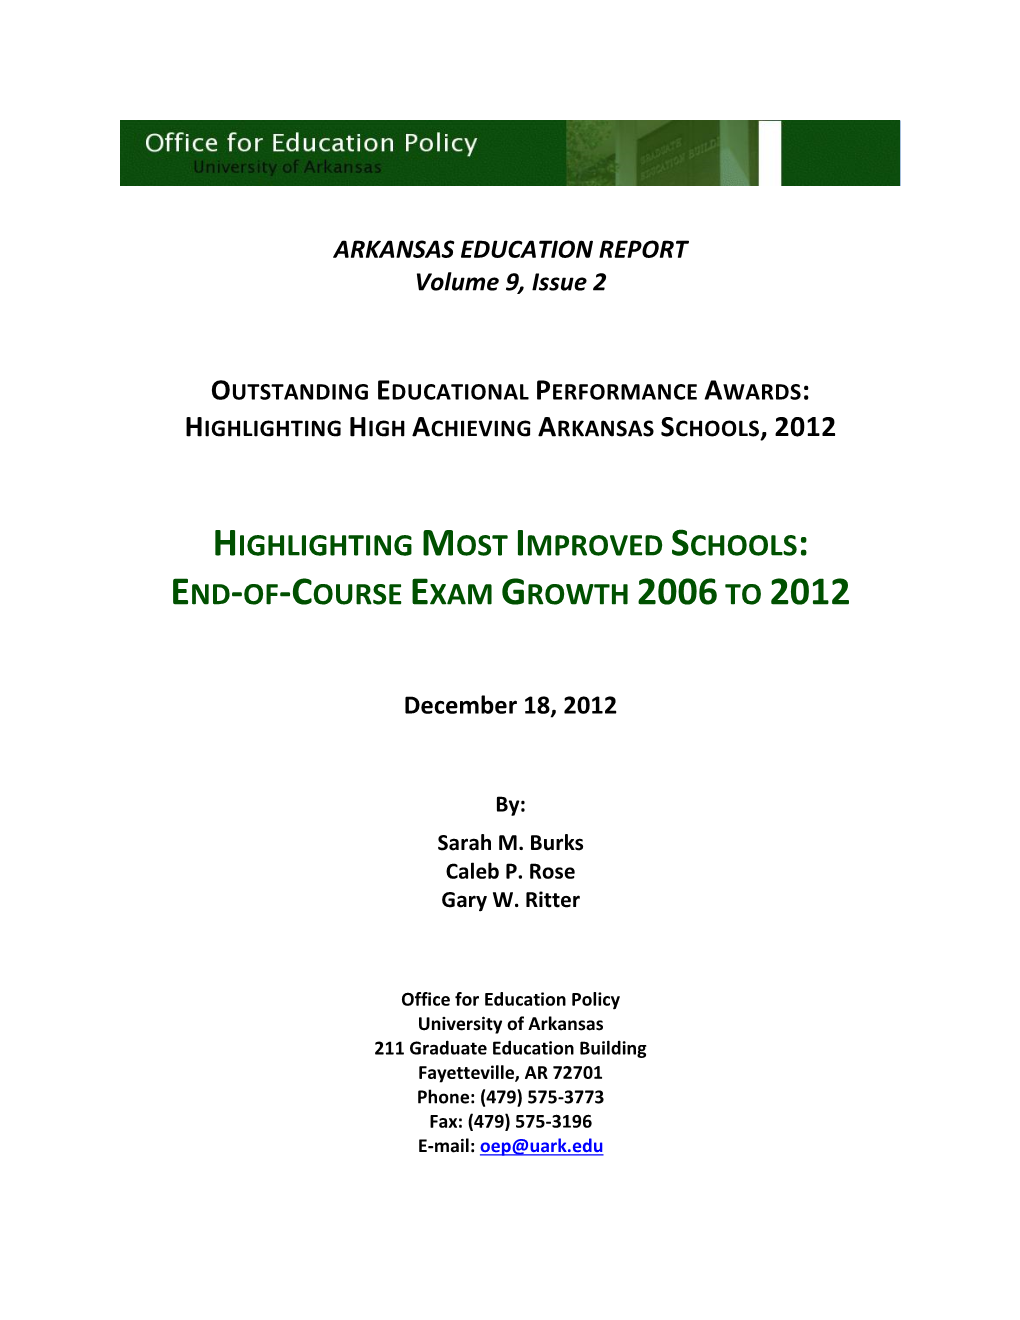 Most Improved Schools: End-Of-Course Exam Growth 2006 to 2012